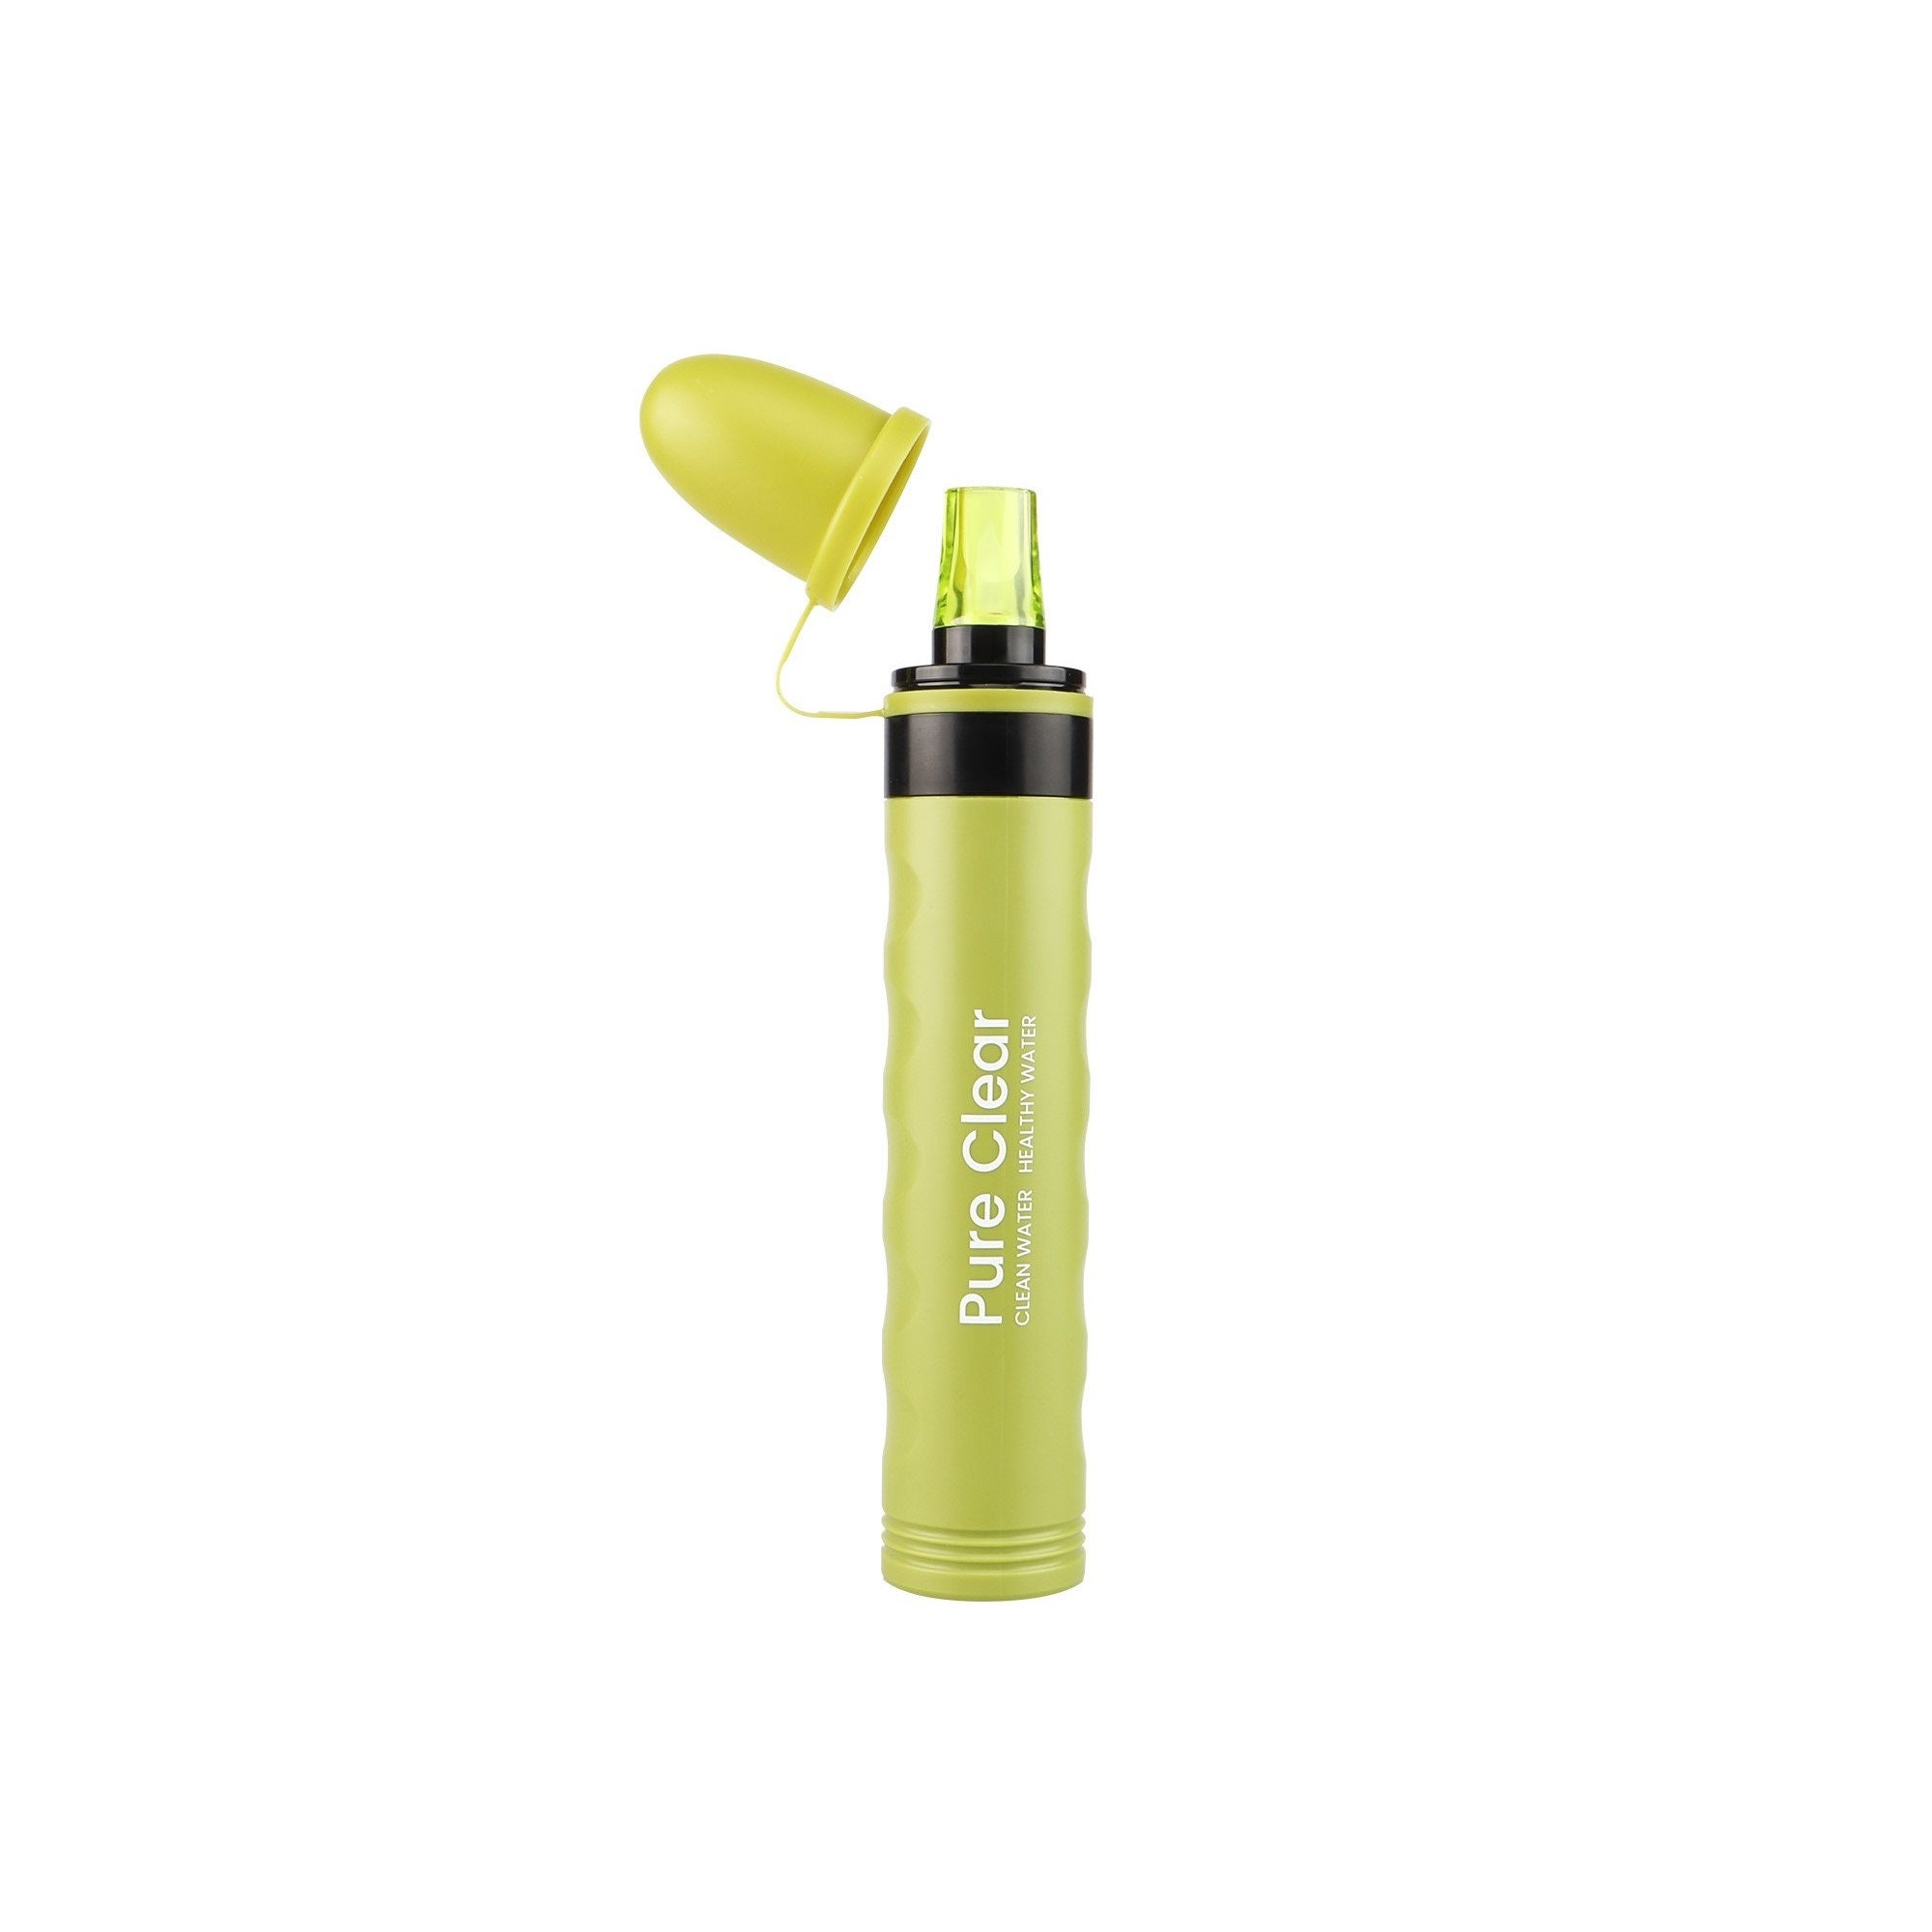 Water Filter Bottles by Pure Clear Filters. the Must Have Sports, Survival,  Hiking and Camping Gear 